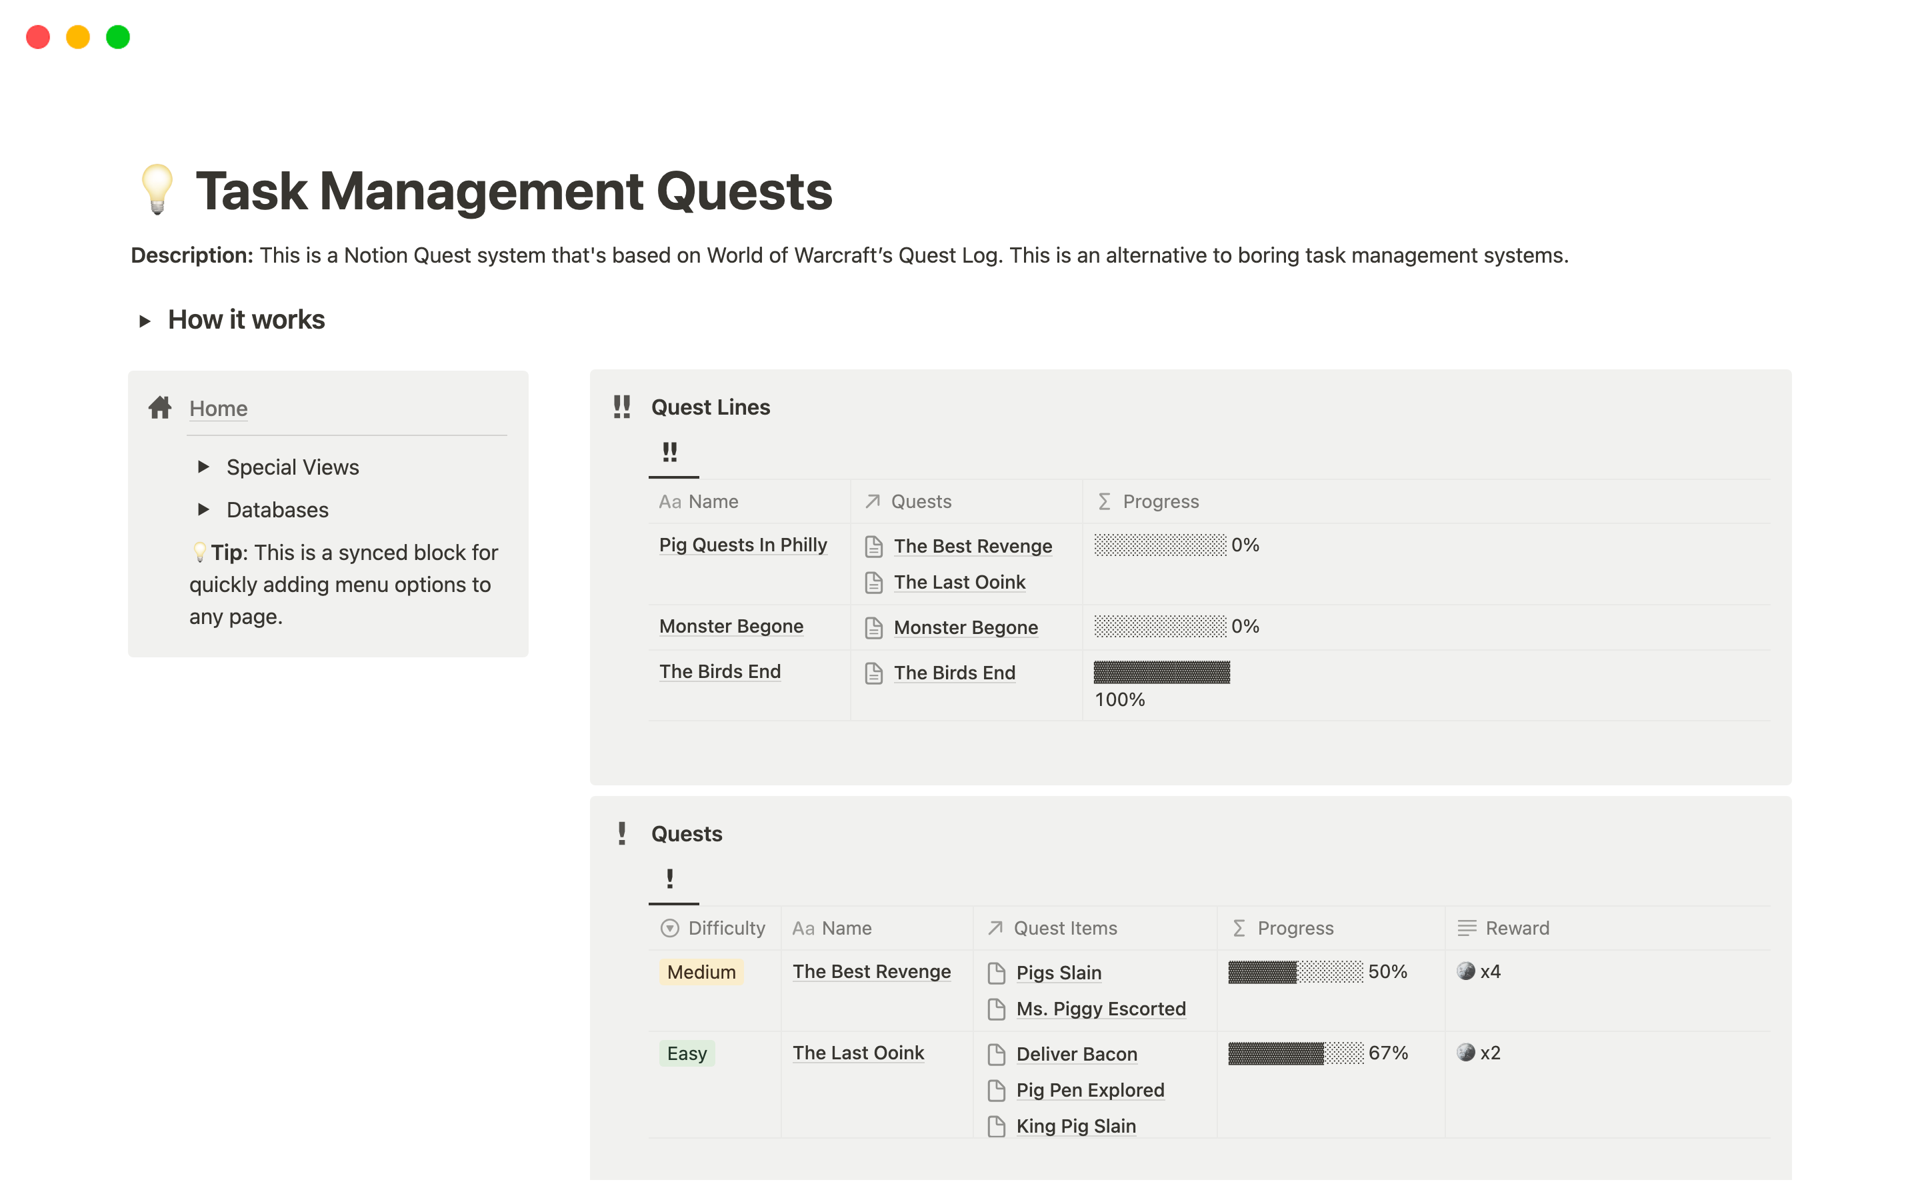 Allows user's to create their own quests from whatever game or project they're working on.
